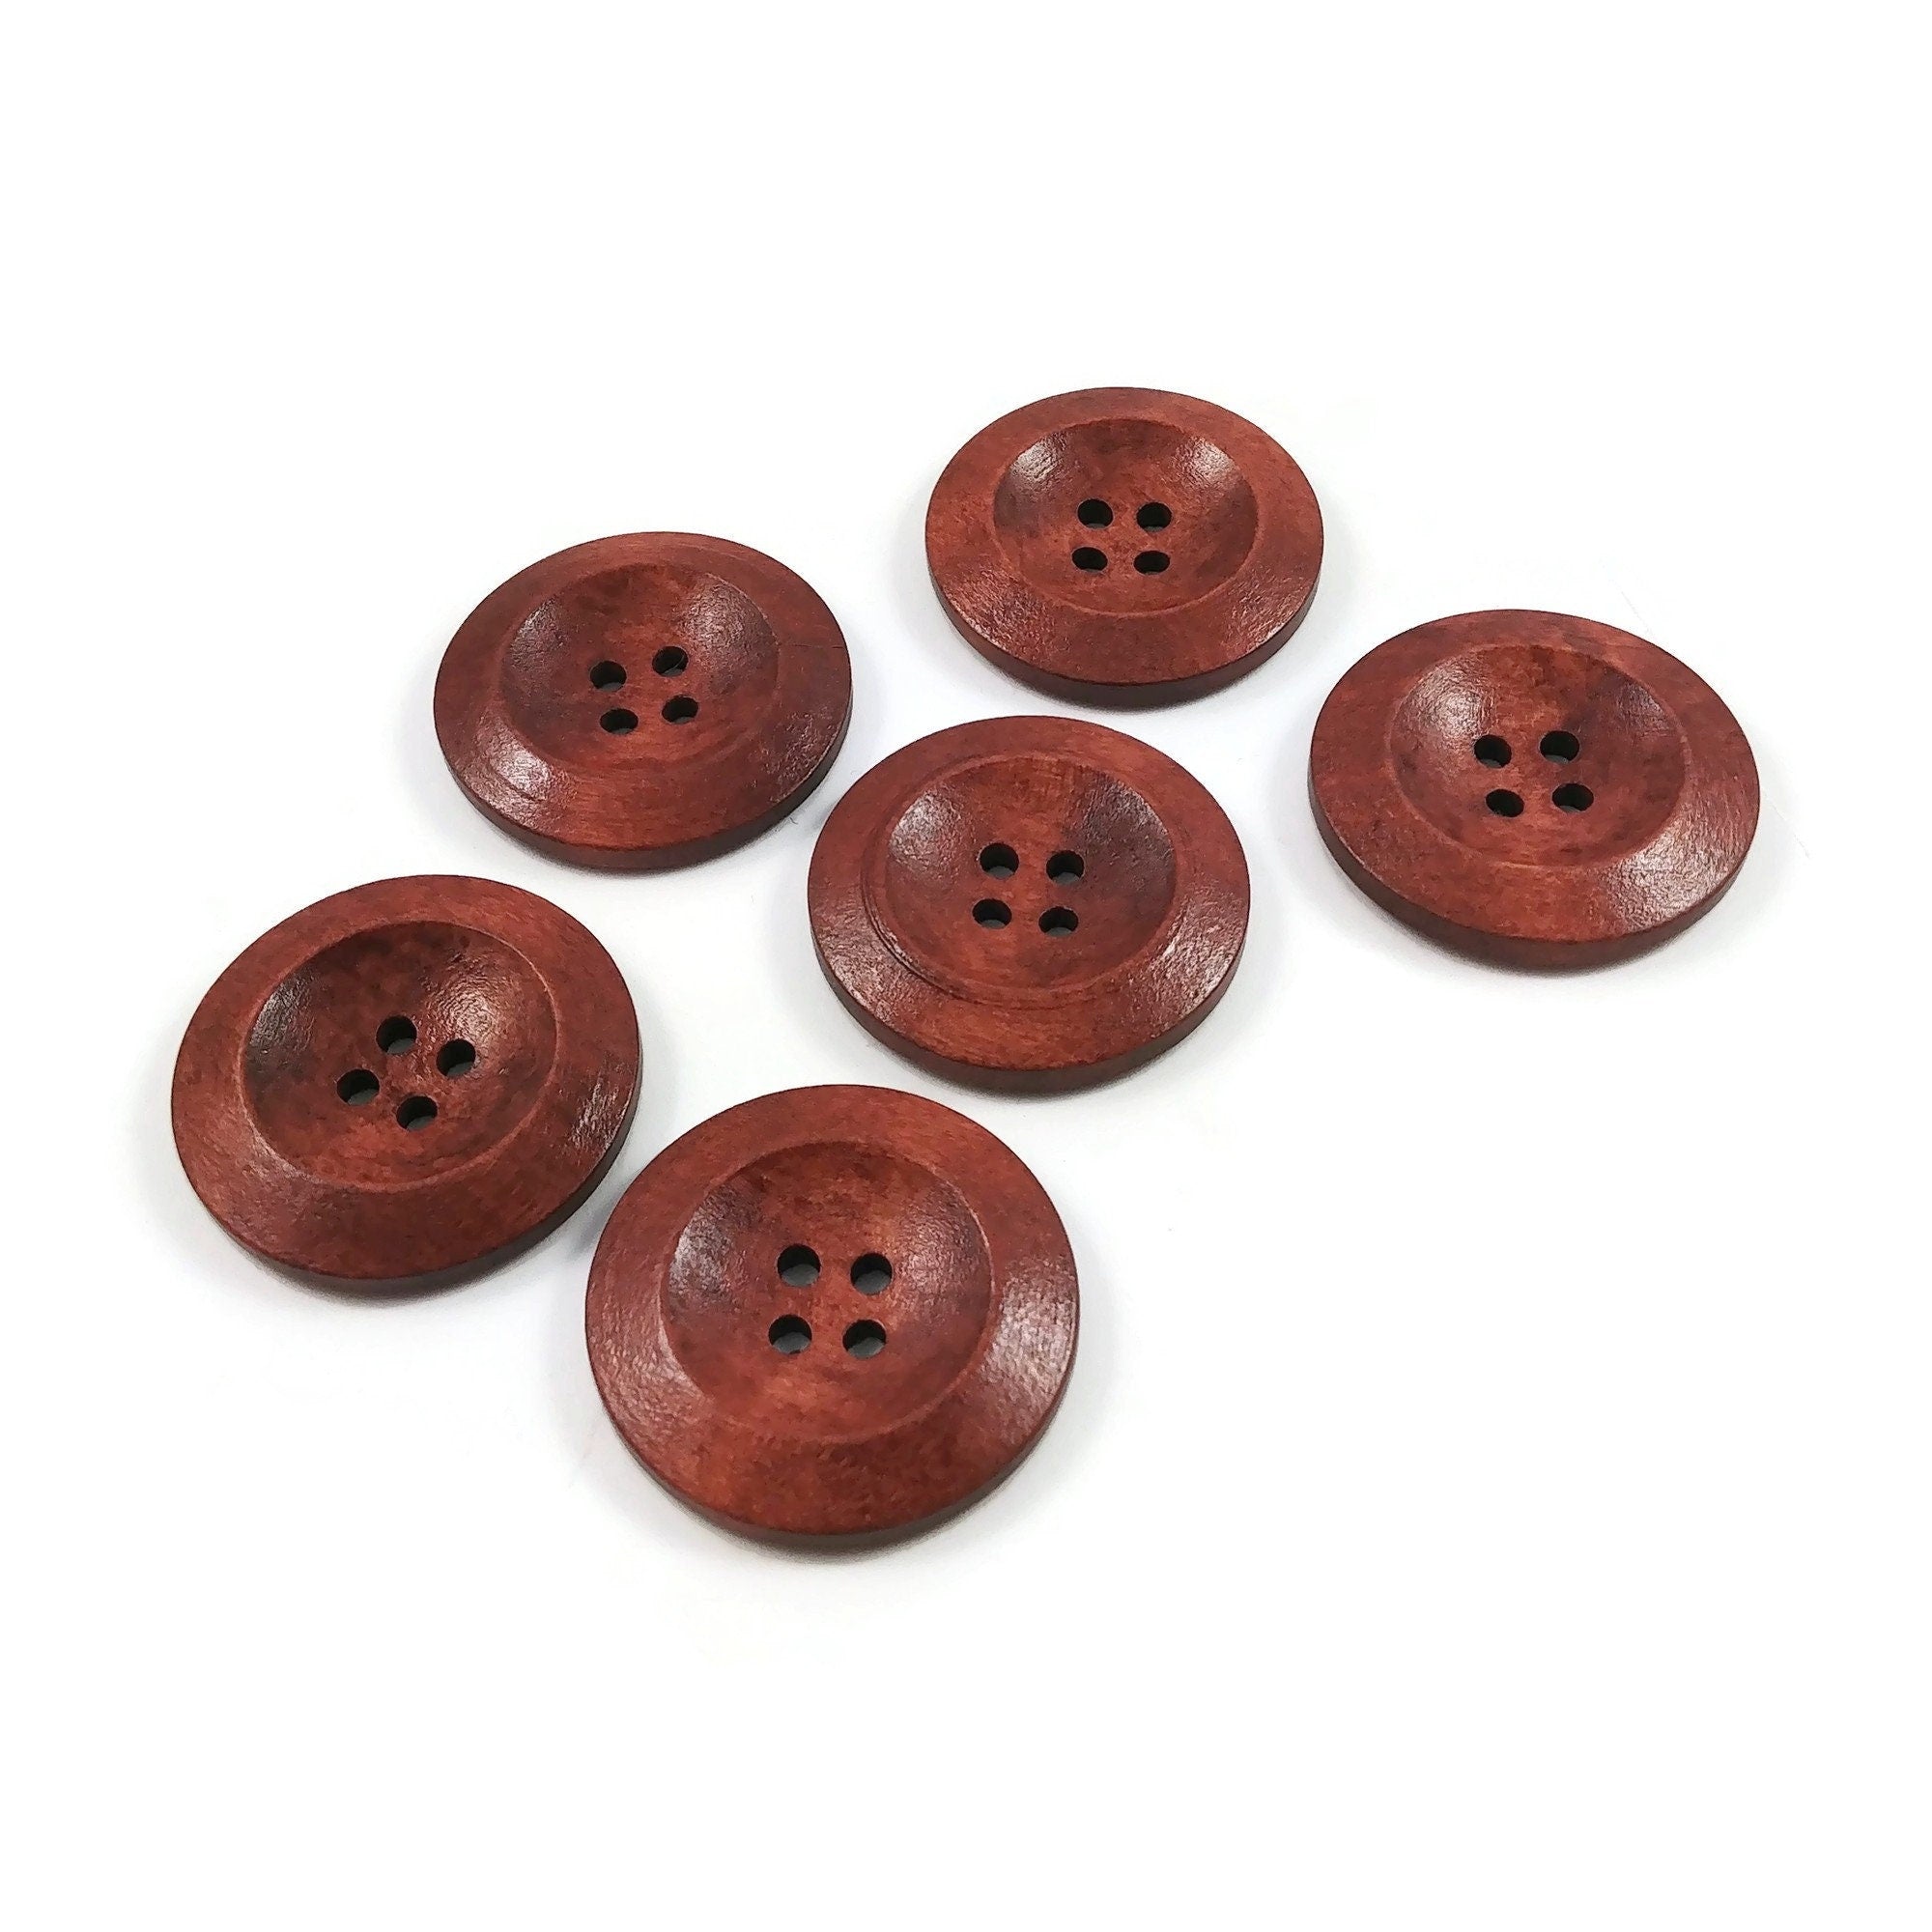 Micro Mini Round Brown Buttons (30 Pieces) - 30